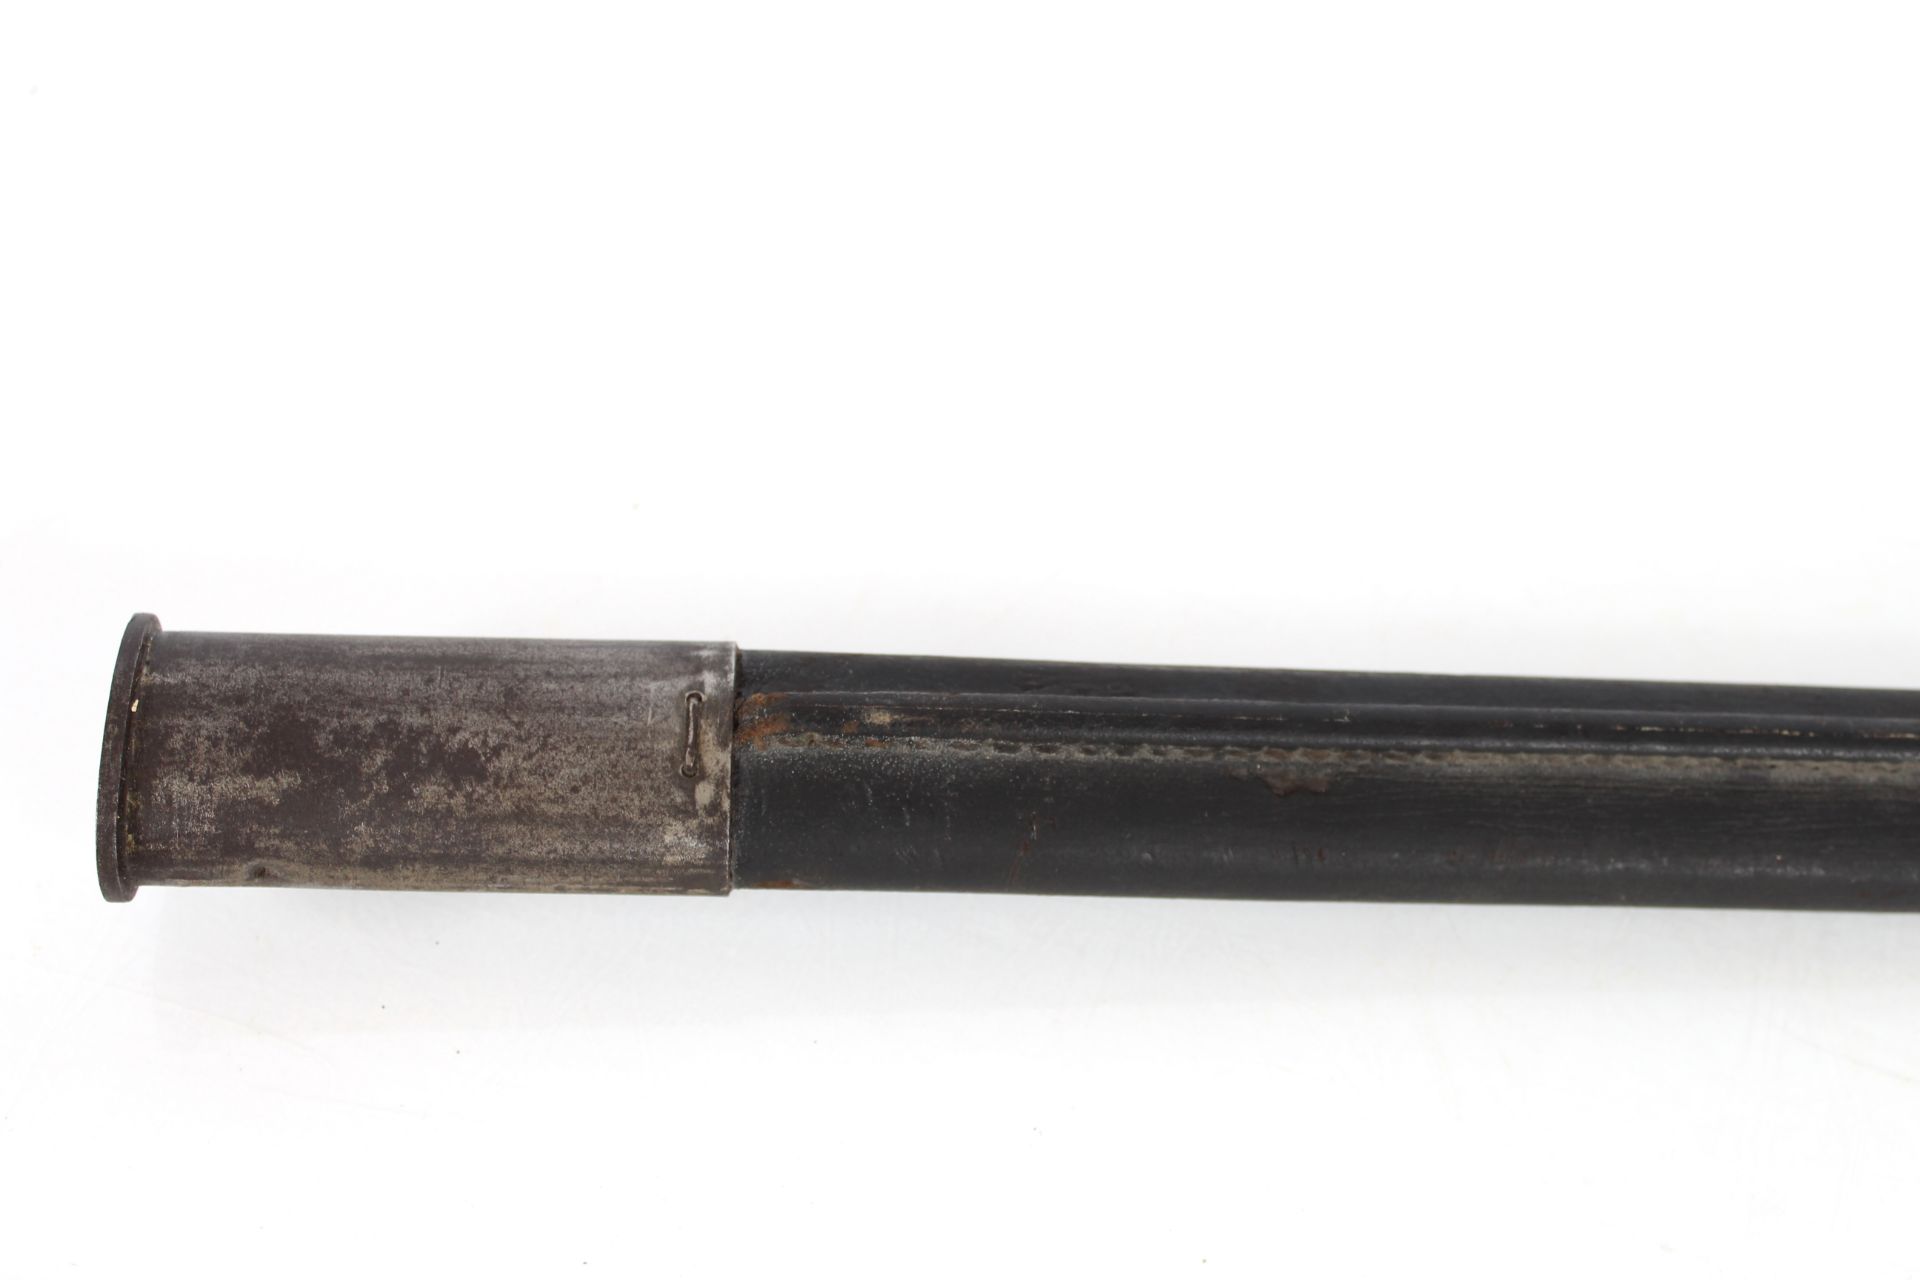 A British model 1907 bayonet with scabbard by Wilk - Image 14 of 14